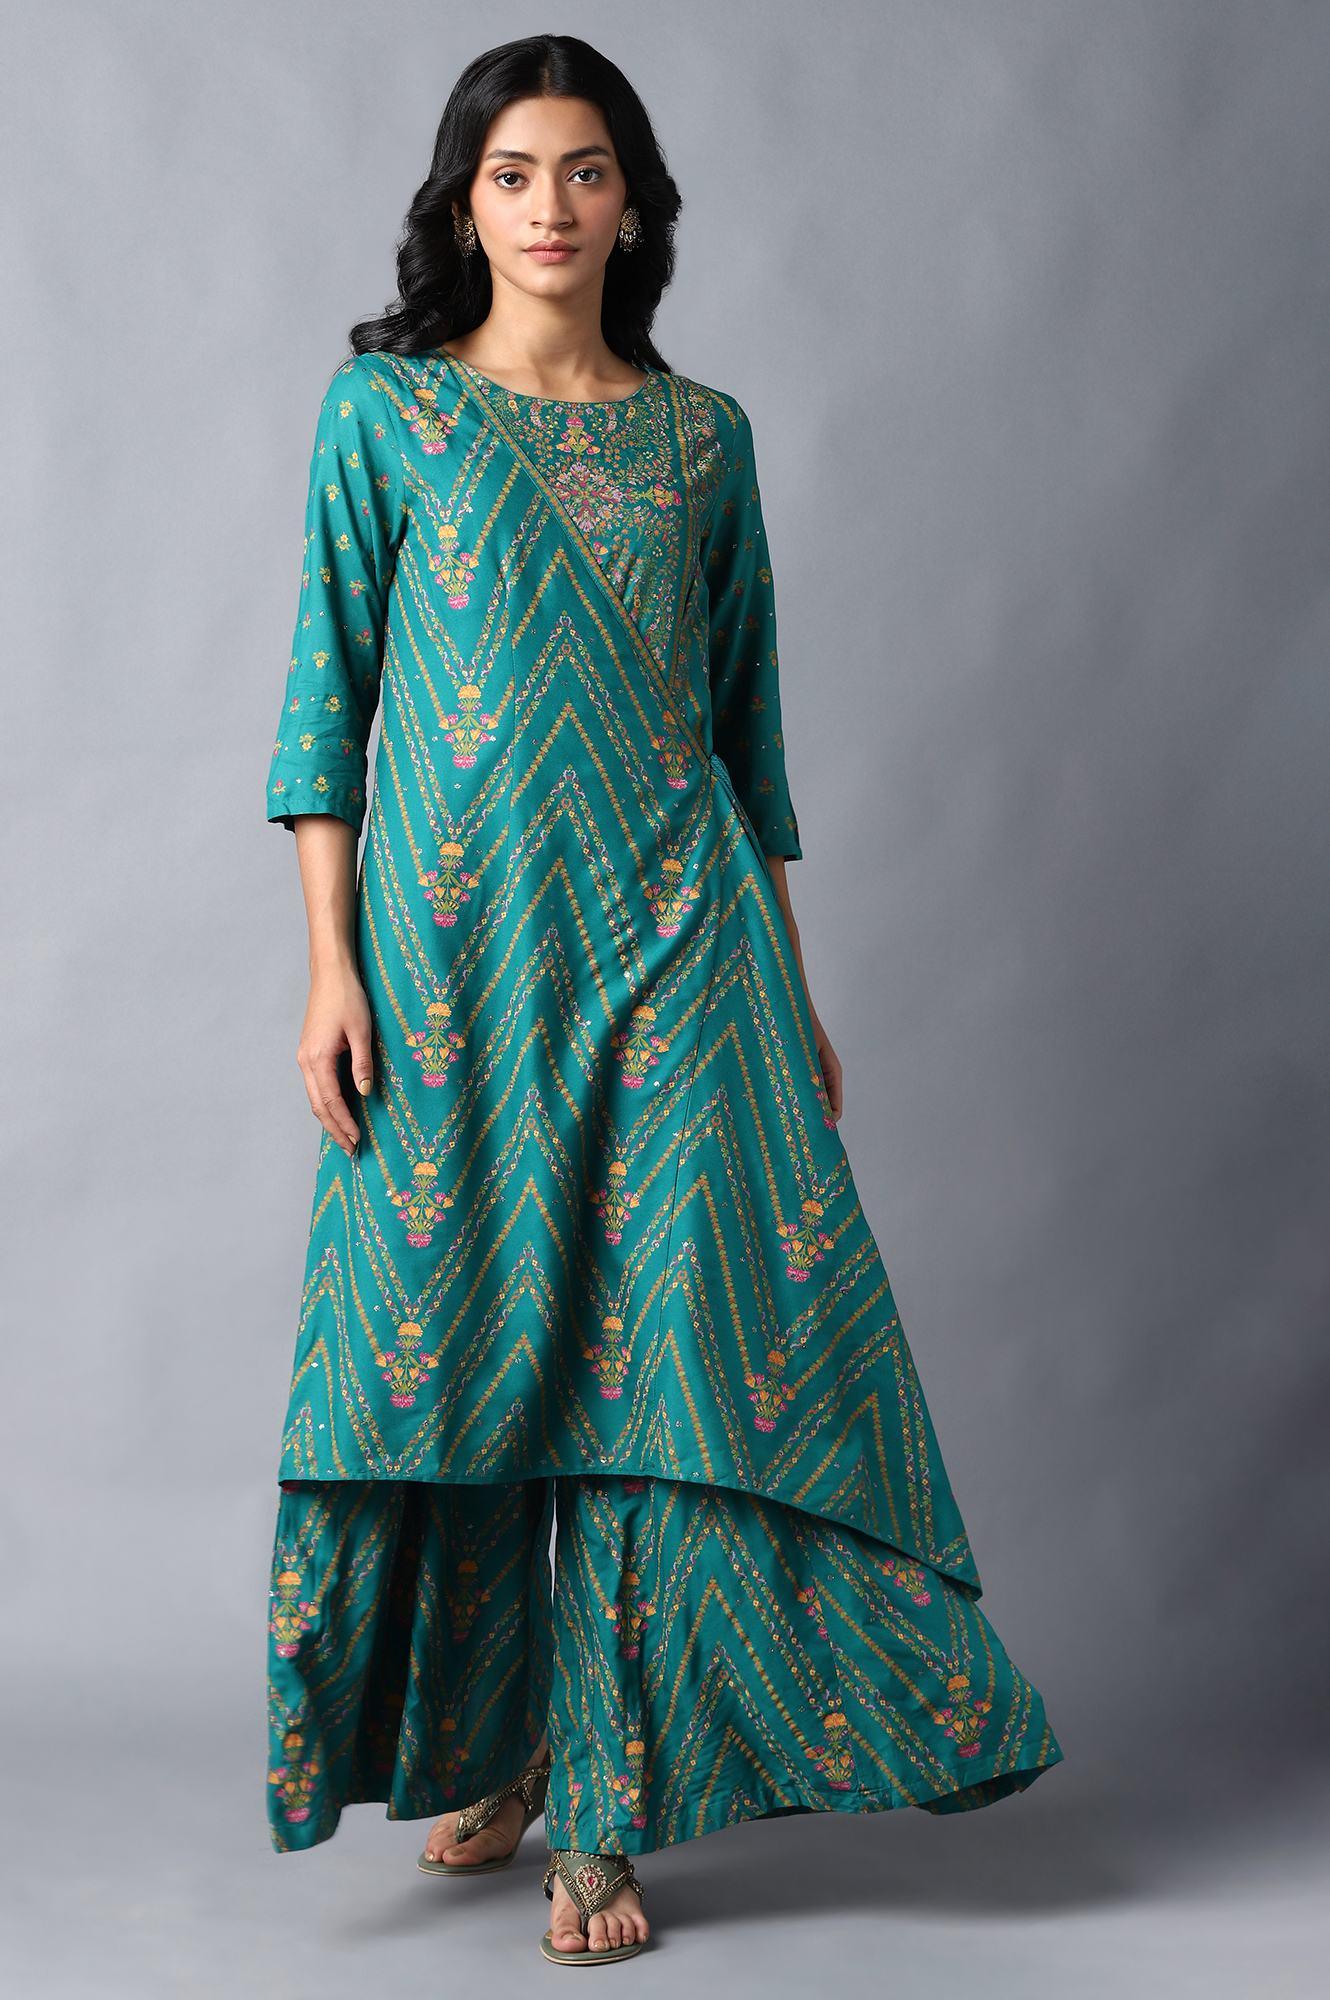 Teal Green Angrakha Jumpsuit In Round Neck - wforwoman